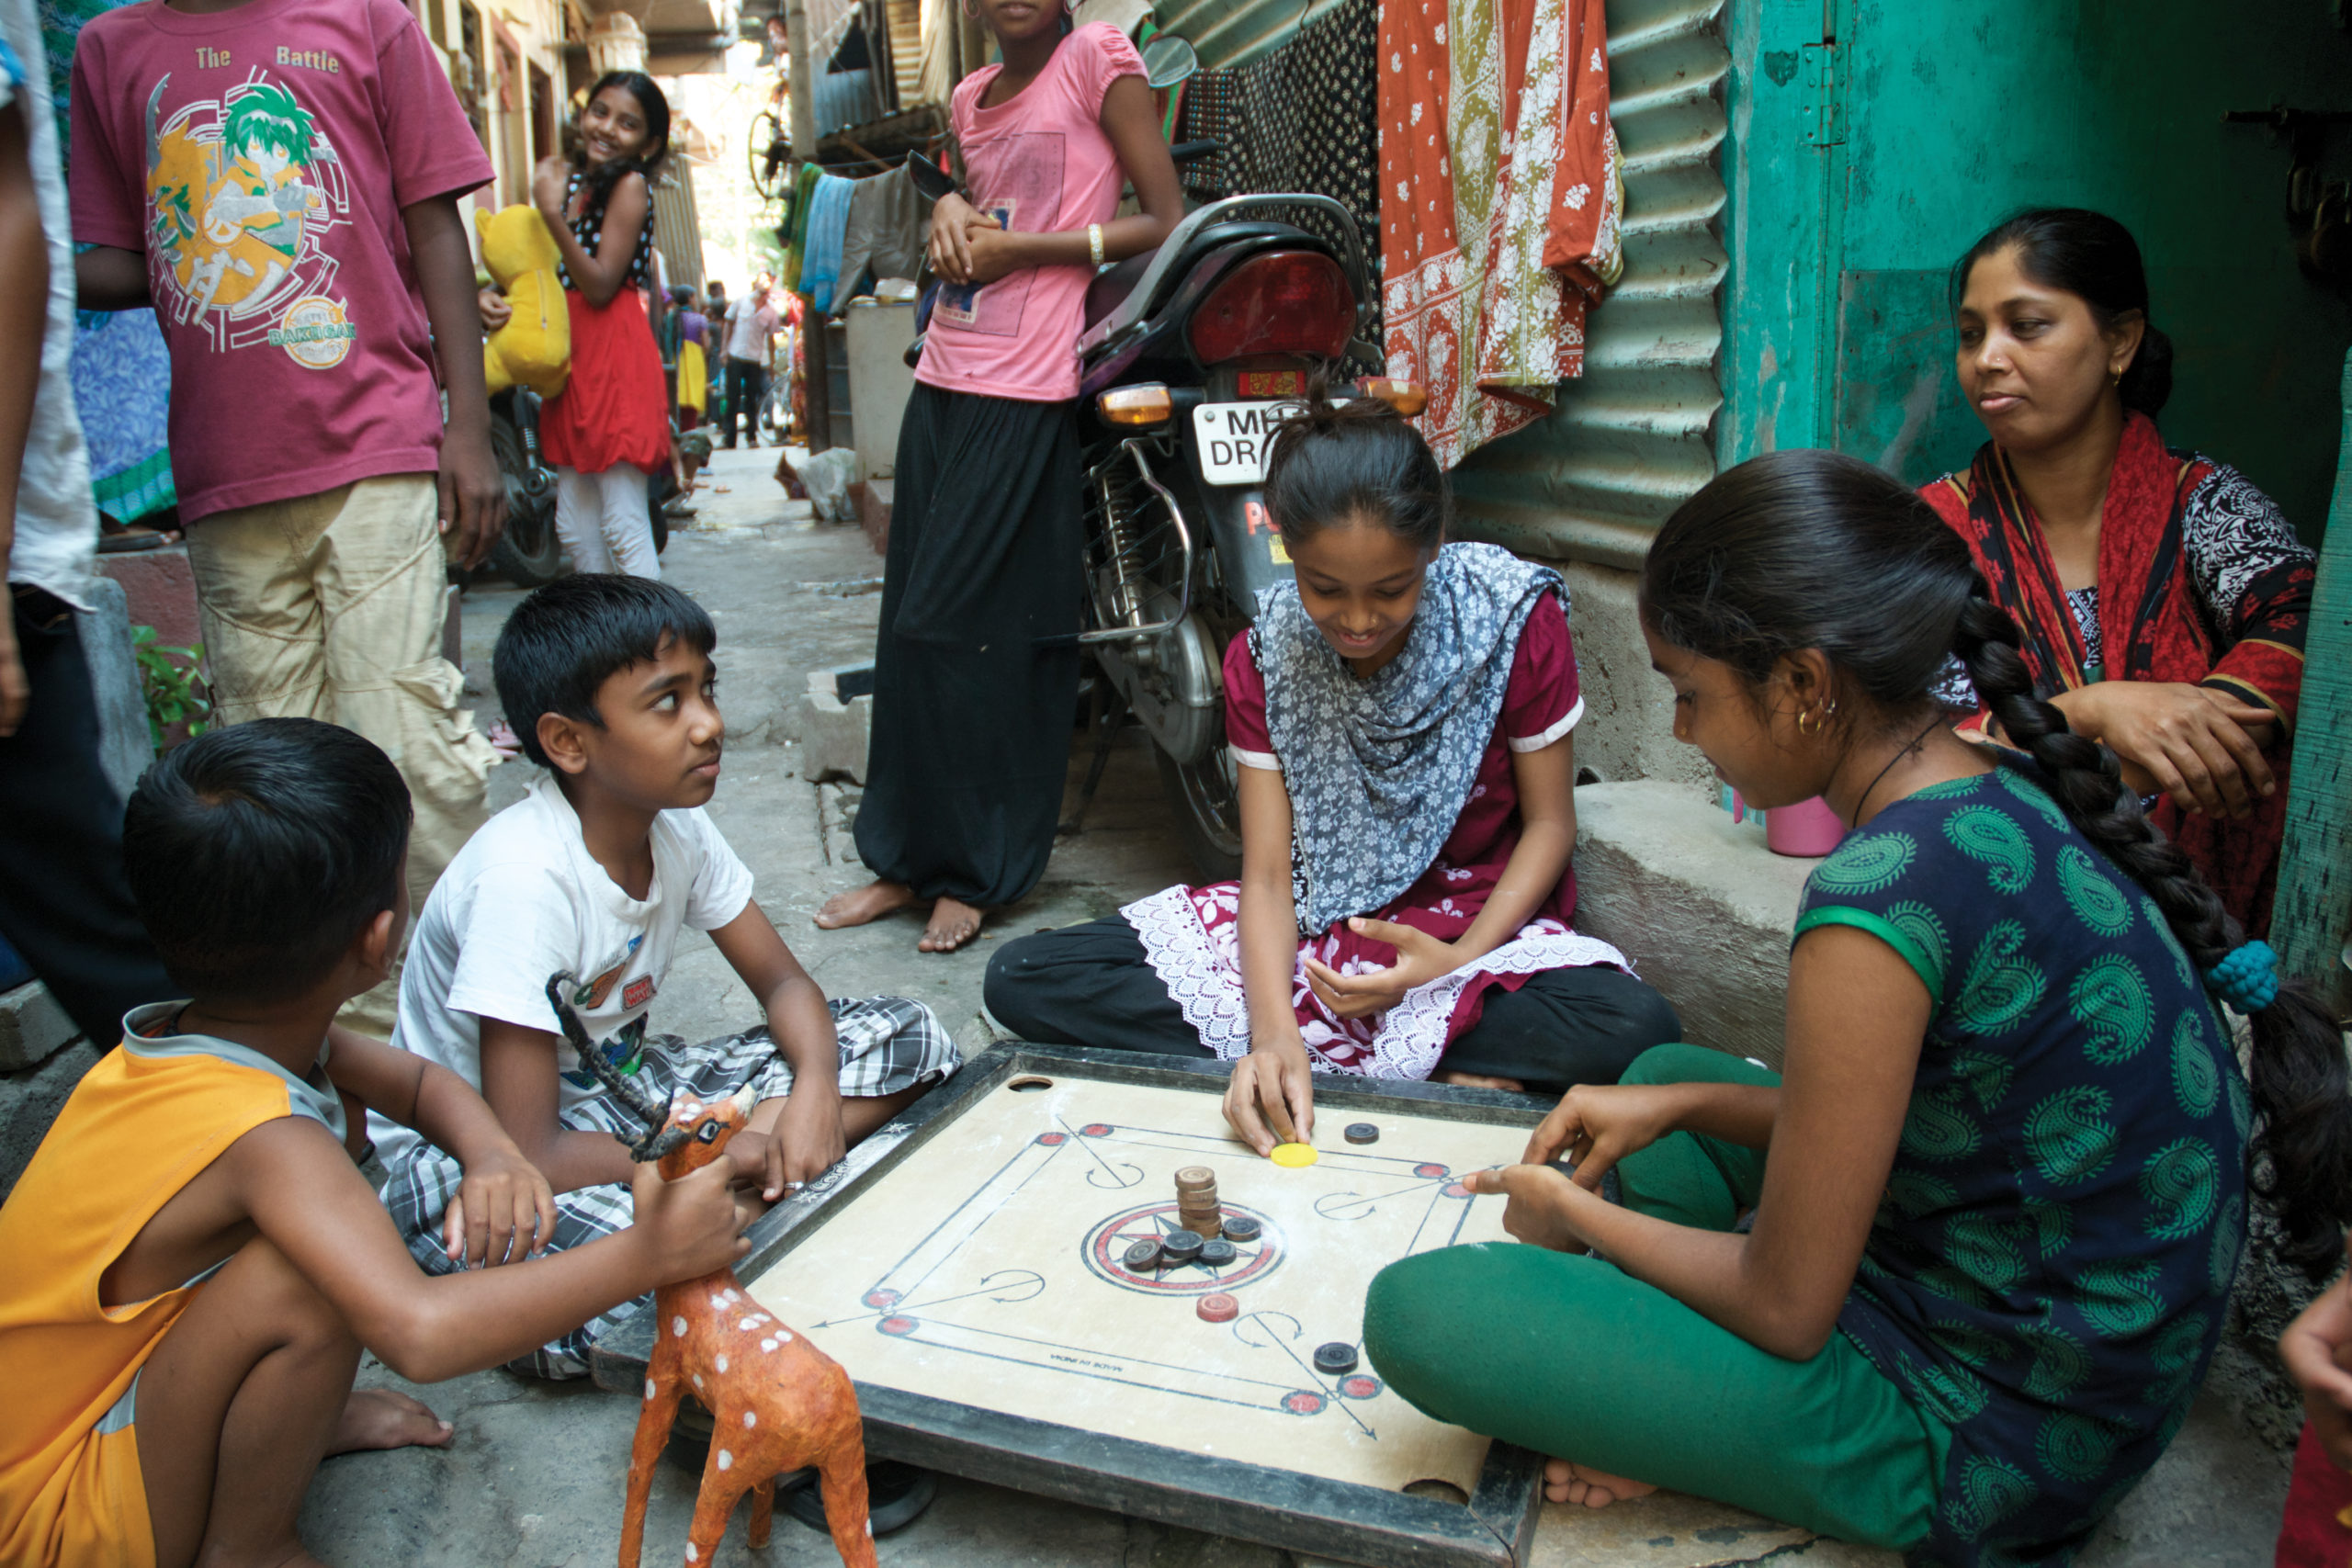 group of children sitting in alleyway playing game in India